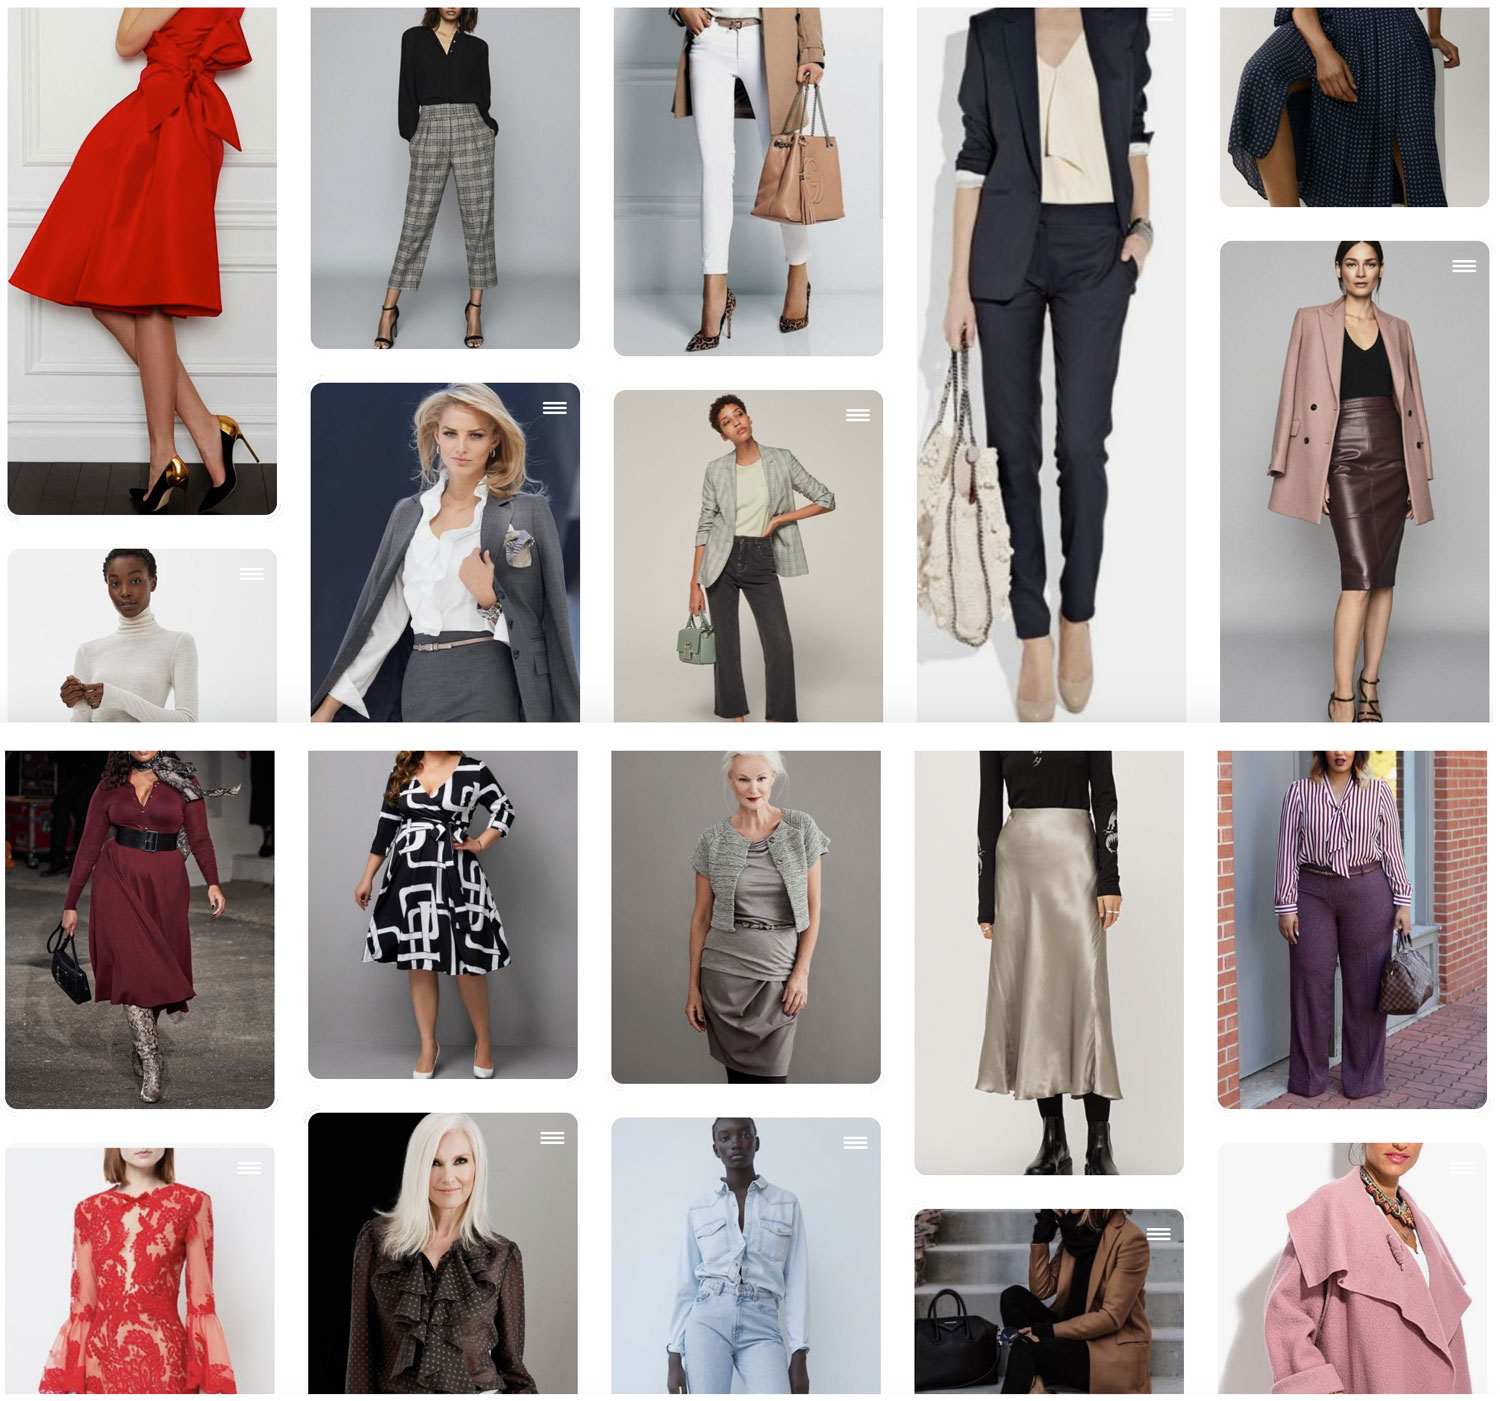 Personal Shopper & Online Fashion Styling Services